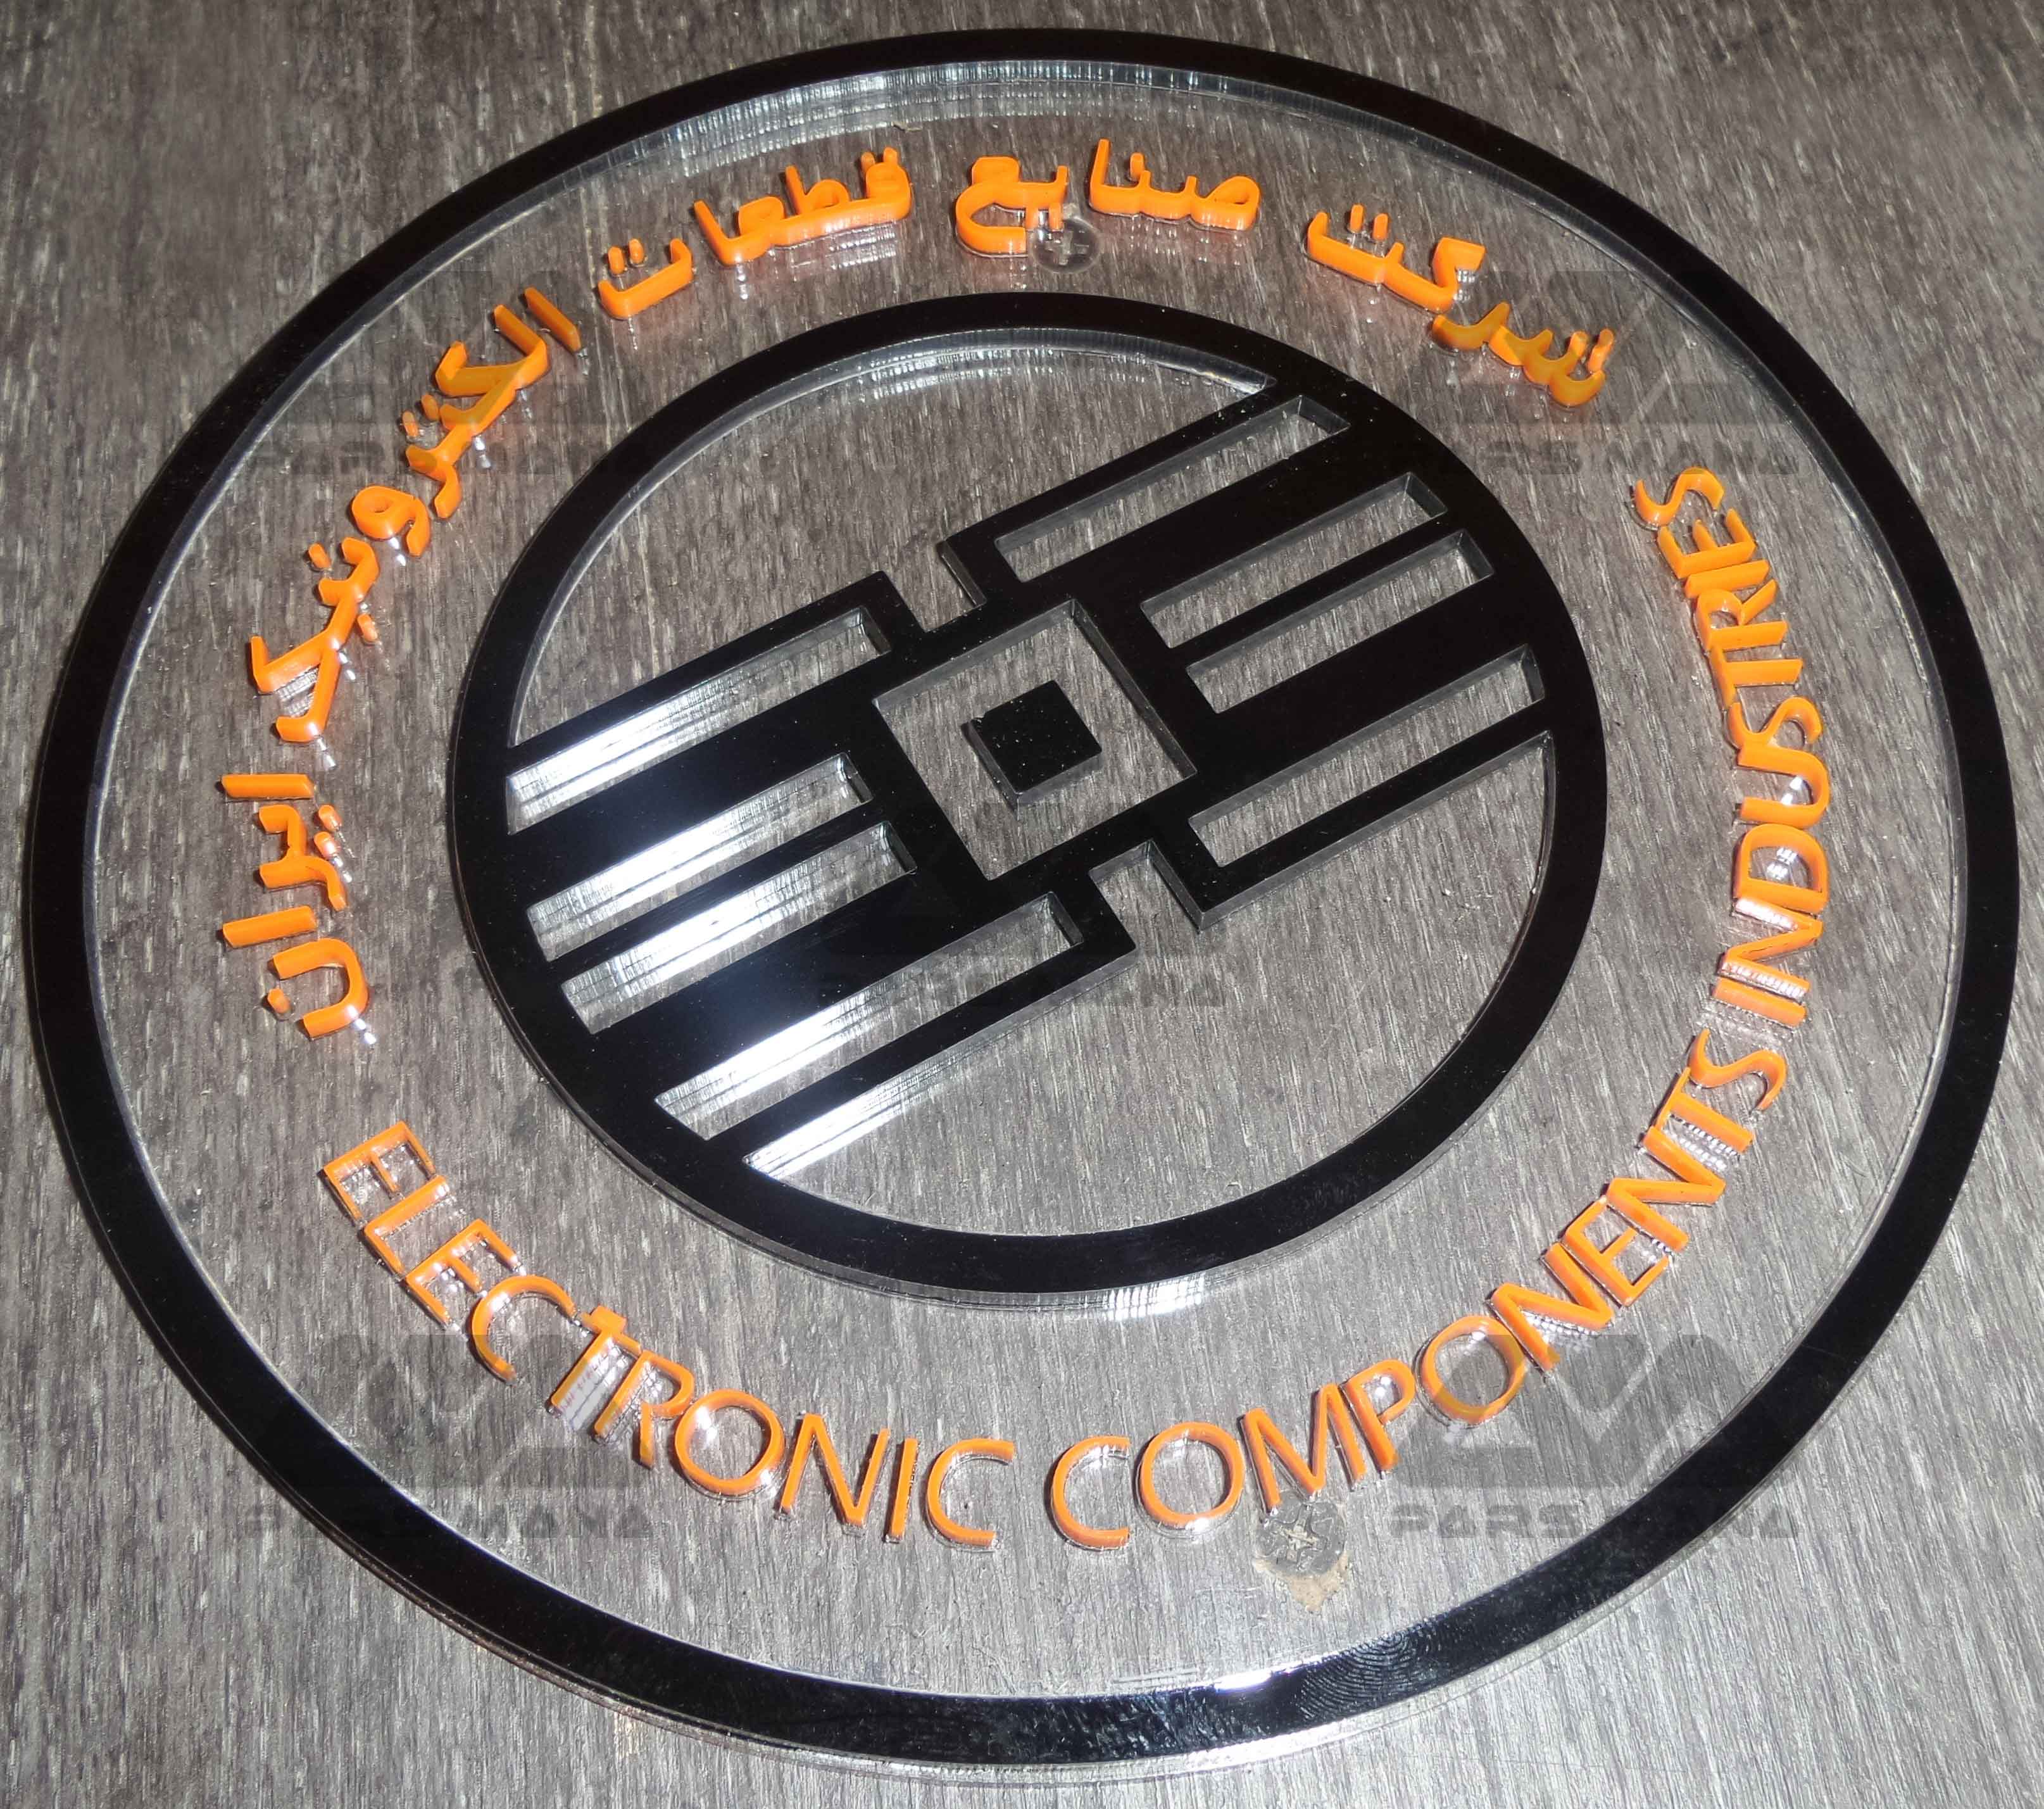 Iran Electronic Components Industries Corporation